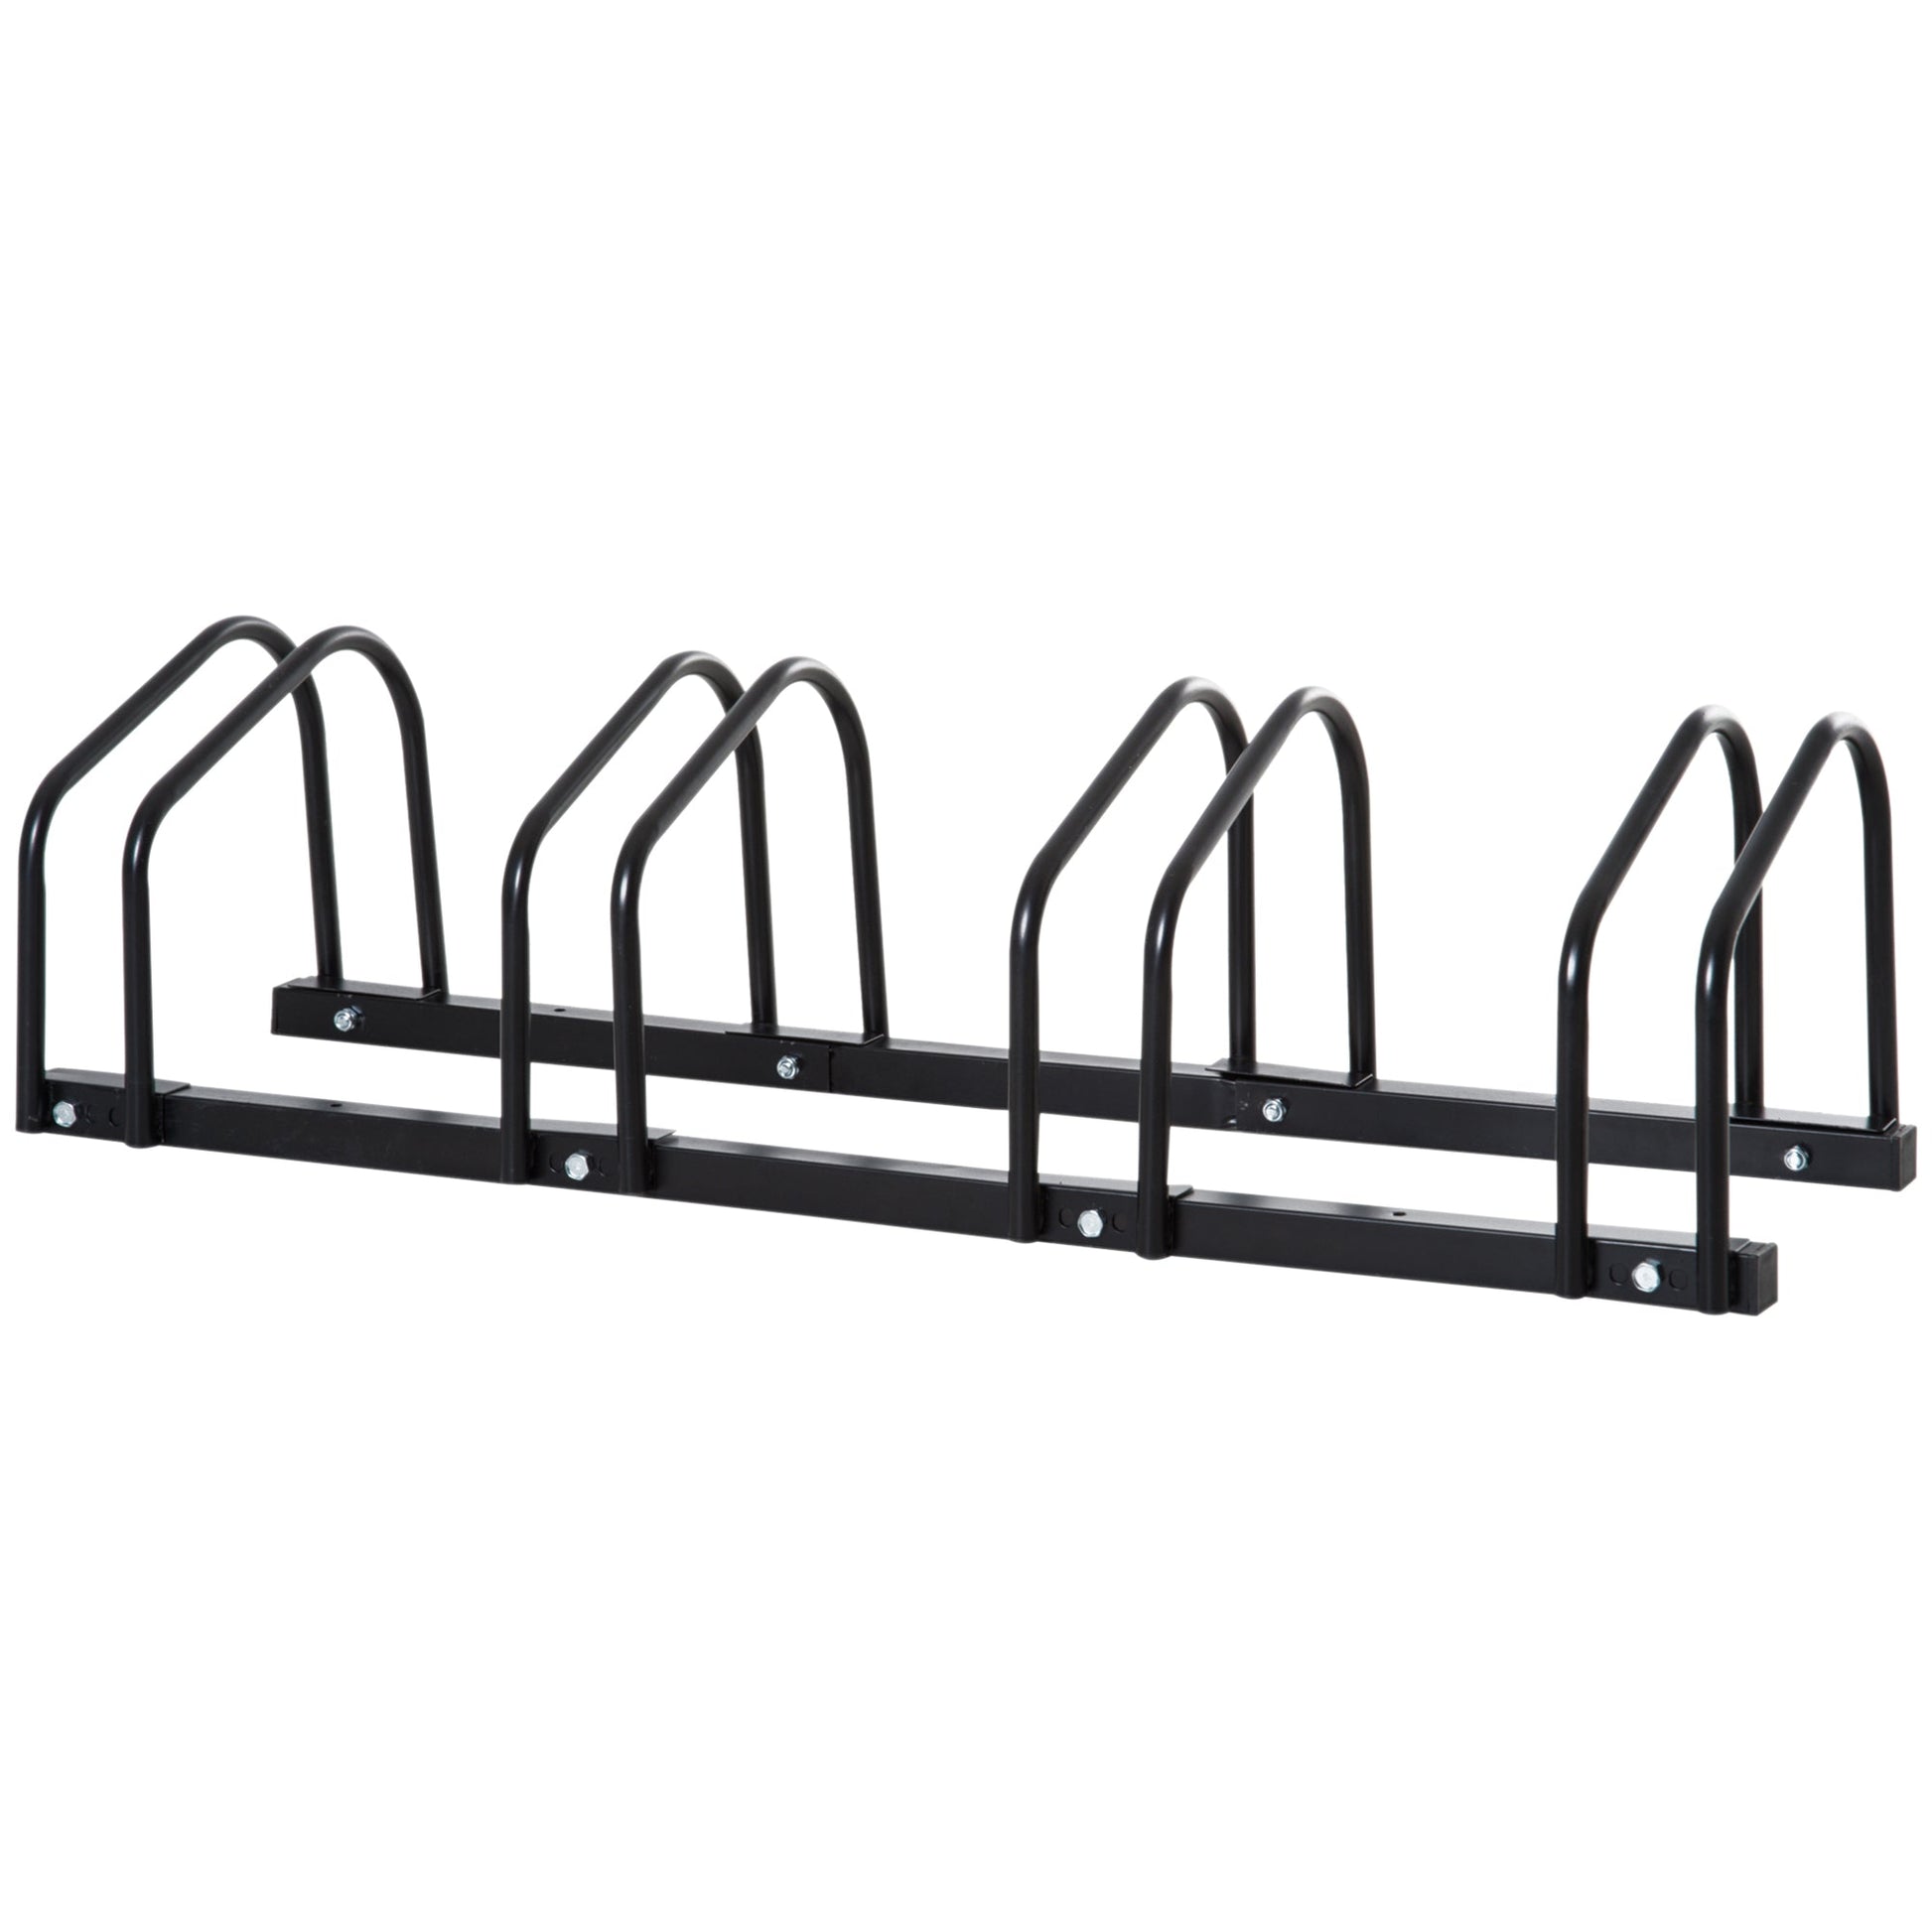 4-Bike Bicycle Floor Parking Rack Cycling Storage Stand Ground Mount Garage Organizer for Indoor and Outdoor Use at Gallery Canada